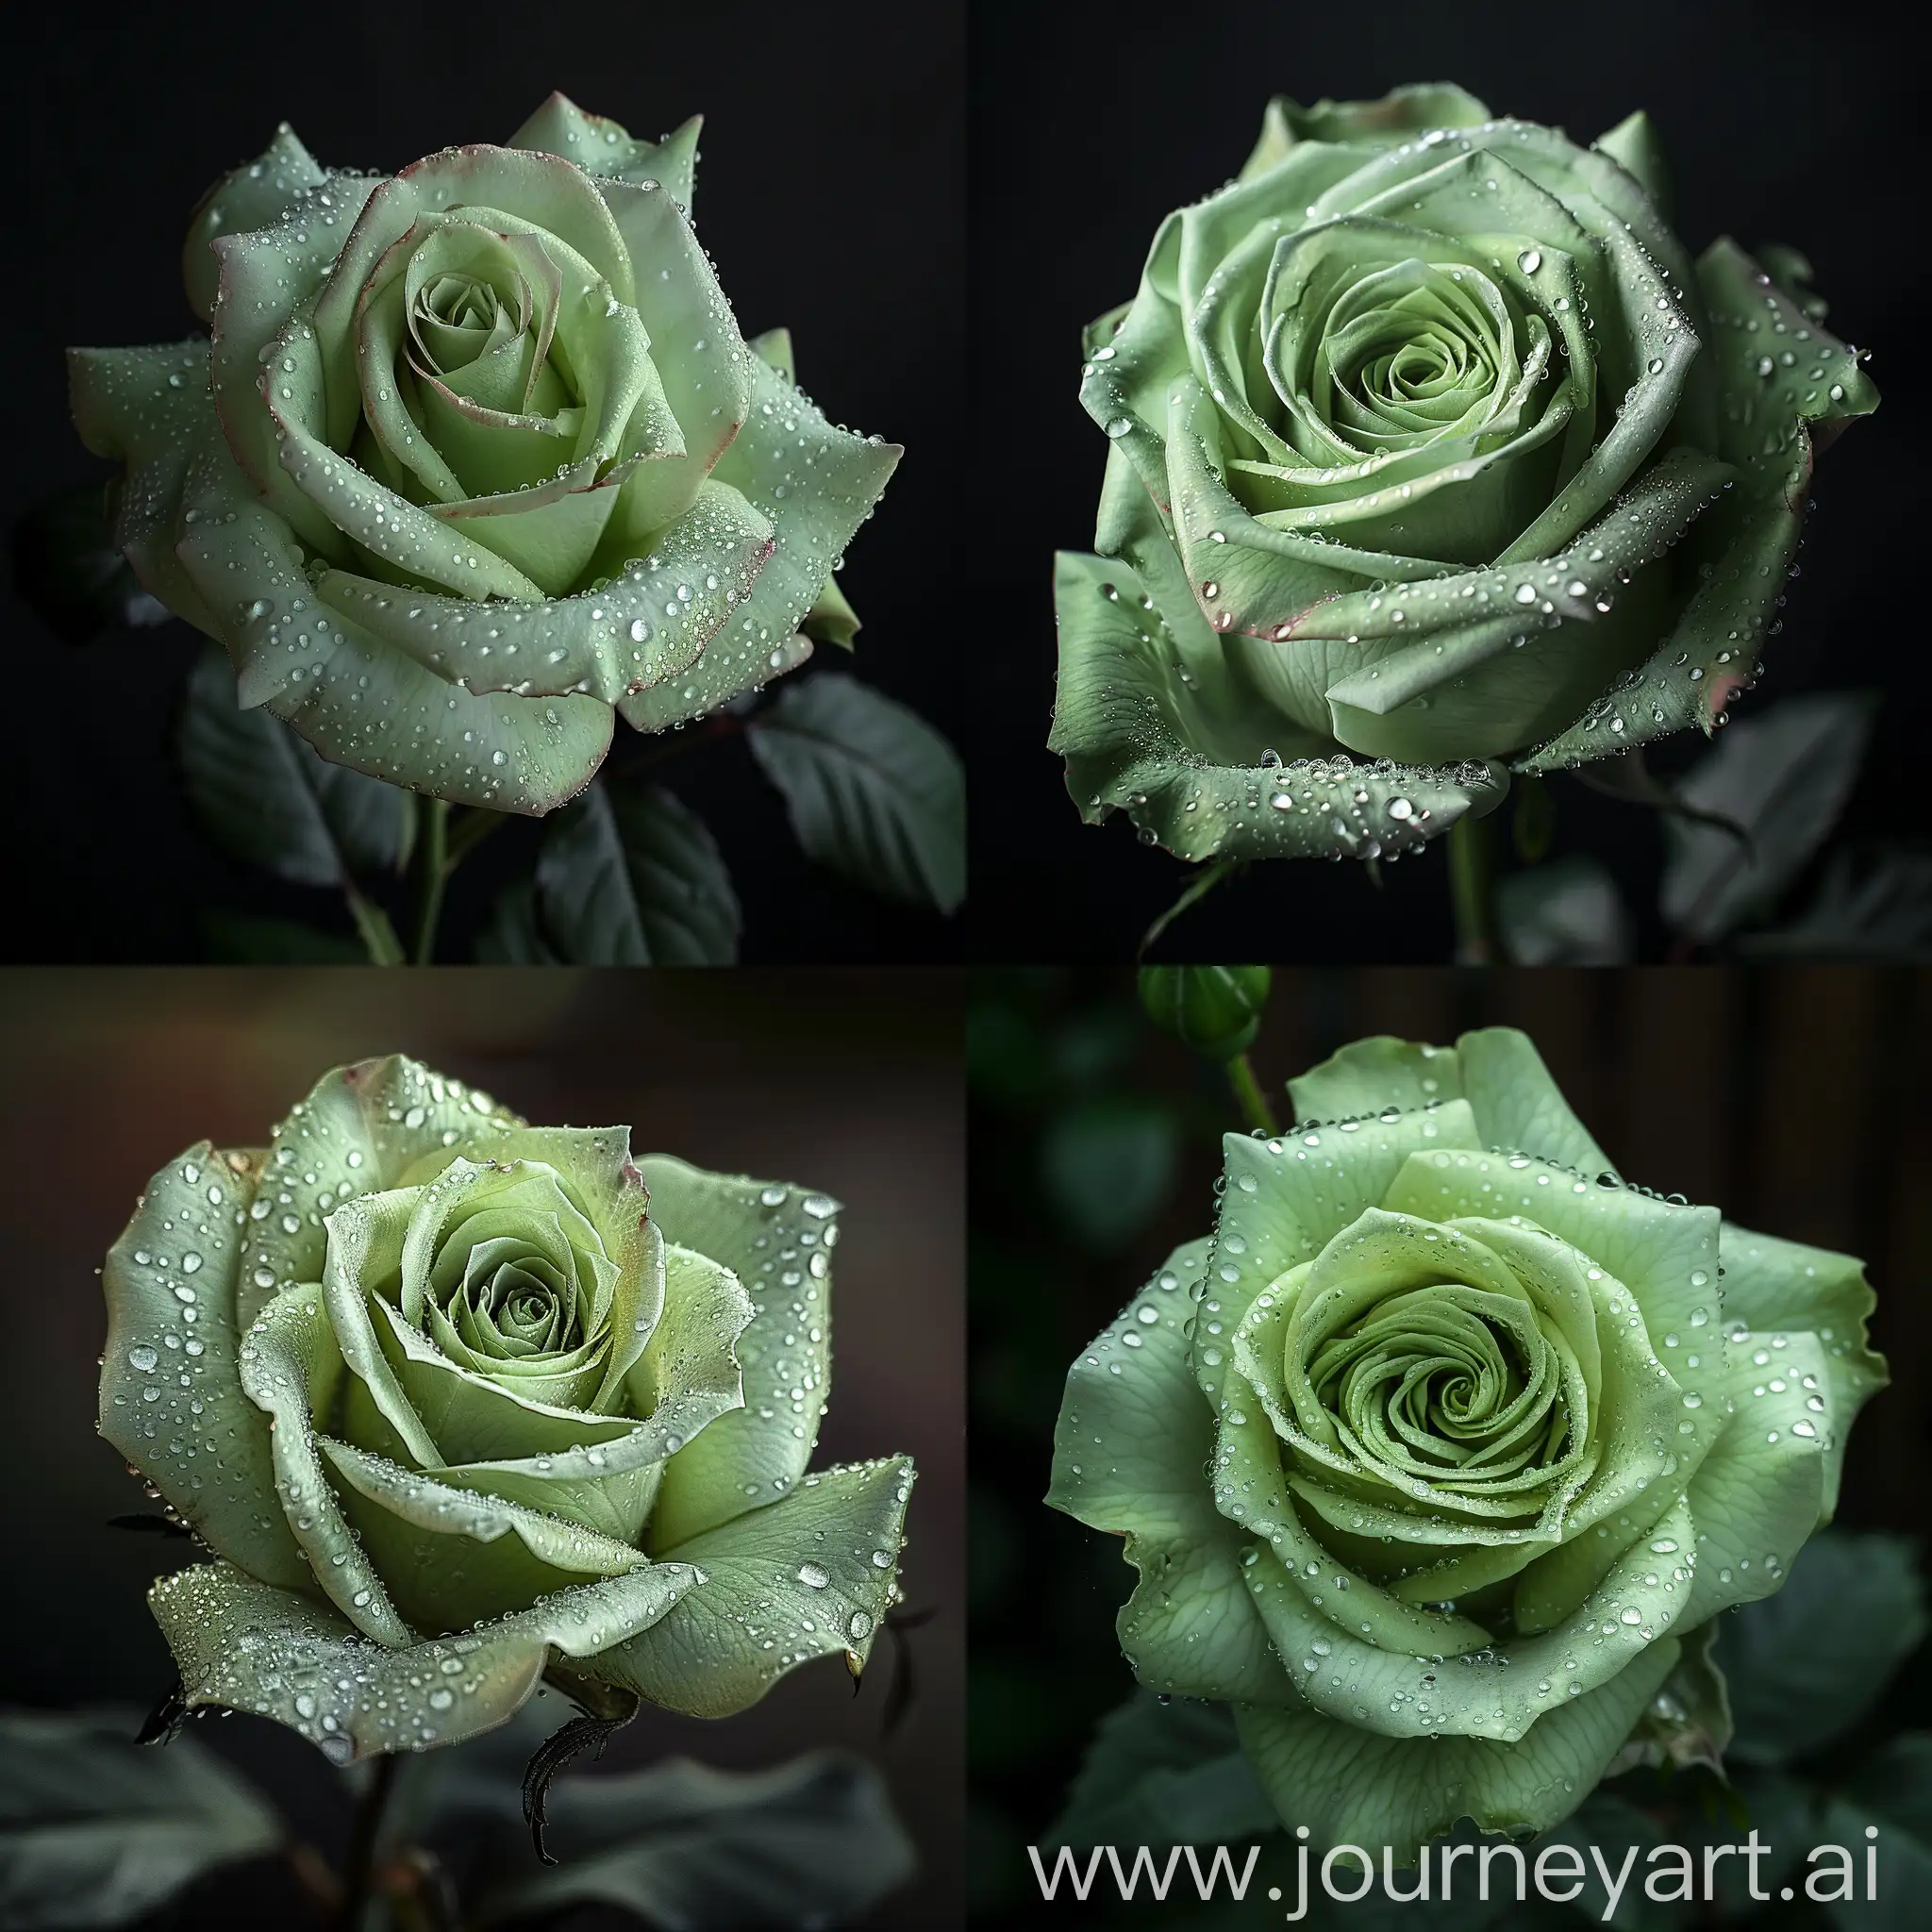 divinely realistic close-up, photorealism, light green rose with drops, beautiful, elegant, saturared, bright contrast, depth of field, black tones, 100 mm shot, f/2.0, natural lighting, realistic, impressive, uhd in guokka color